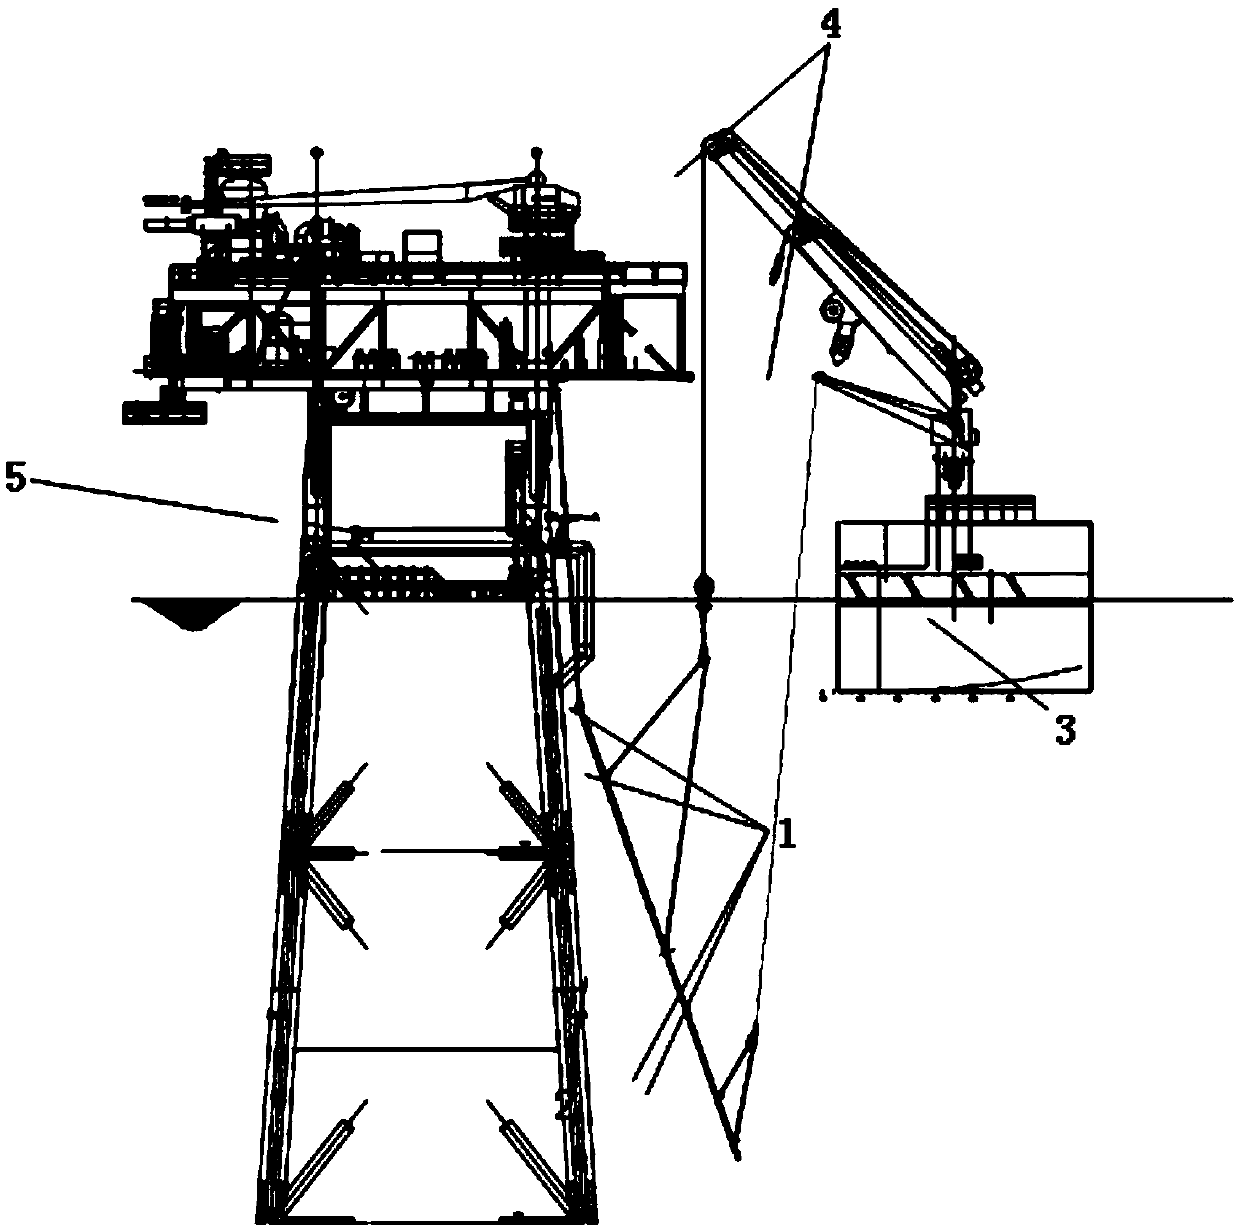 A method of installing risers with twin cranes onboard a vessel supported by saturation diving